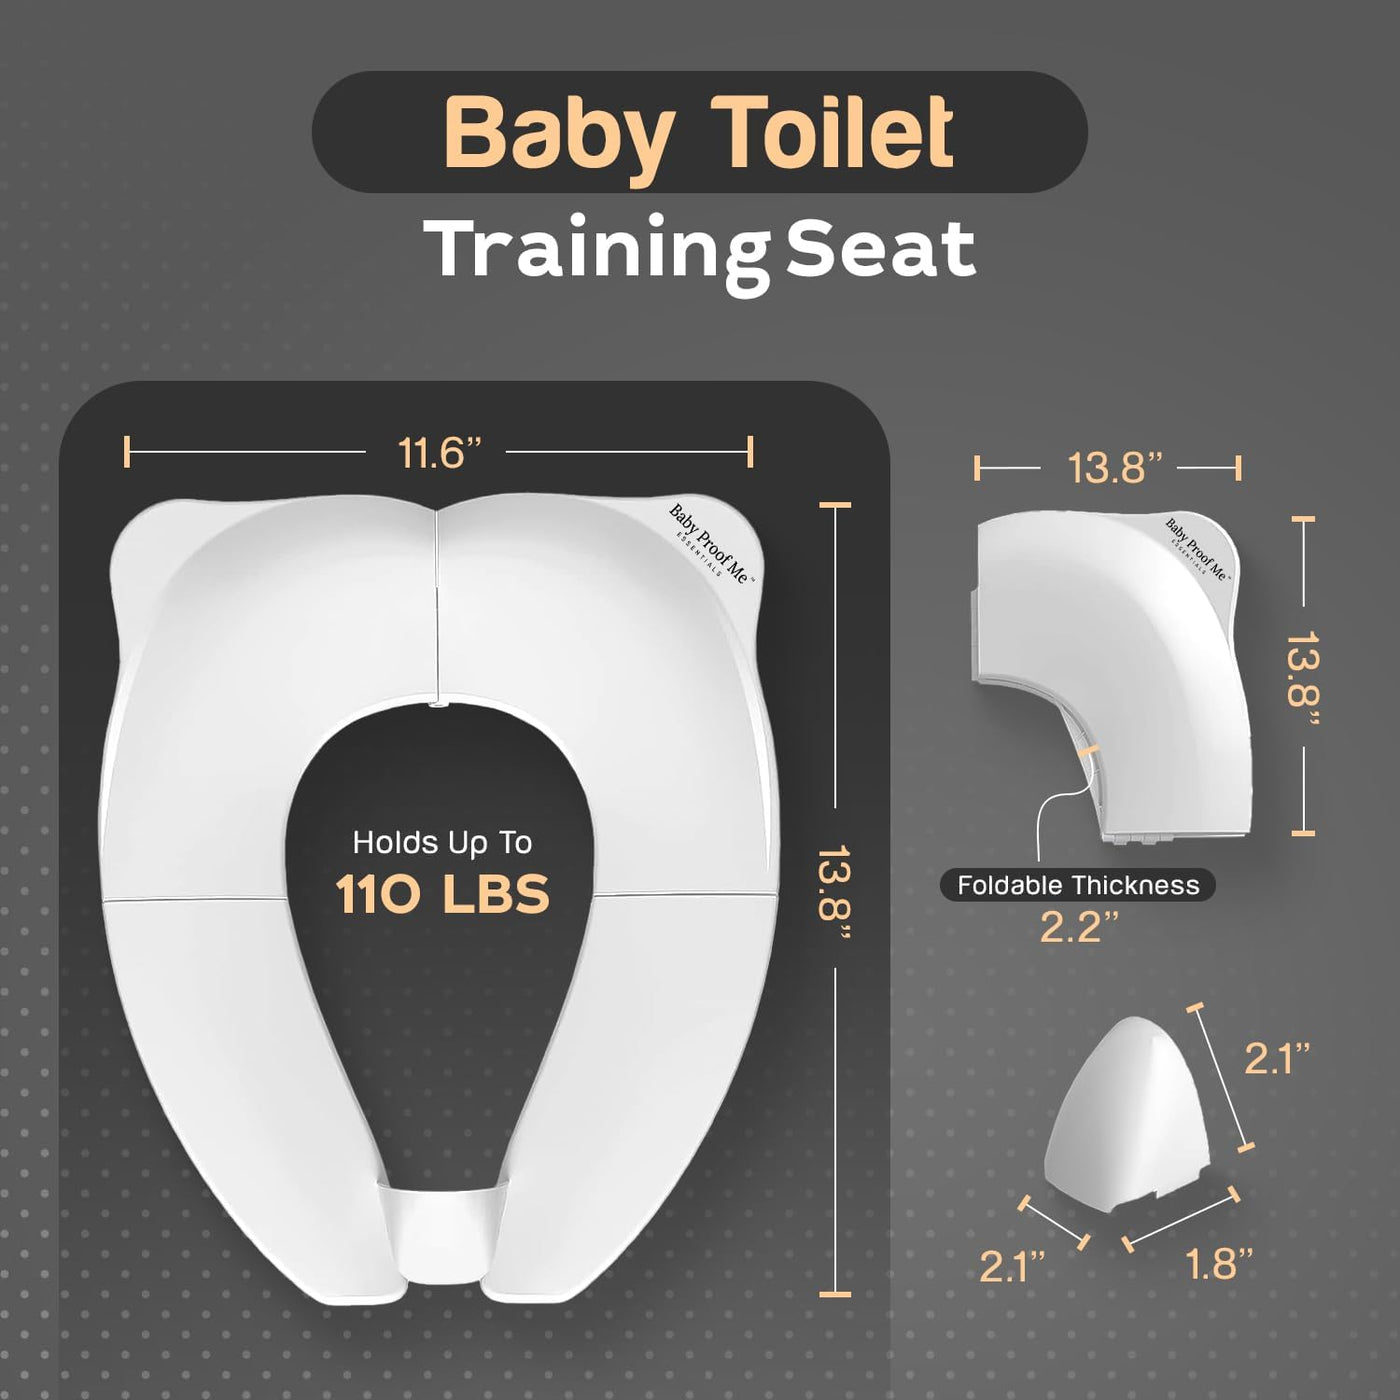 Baby Proof Me Essentials Kids/Toddler Toilet Seat Cover - Splash Guard, Foldable Travel Potty Seat with Storage Bag, Non-slip Training Seat for Kids